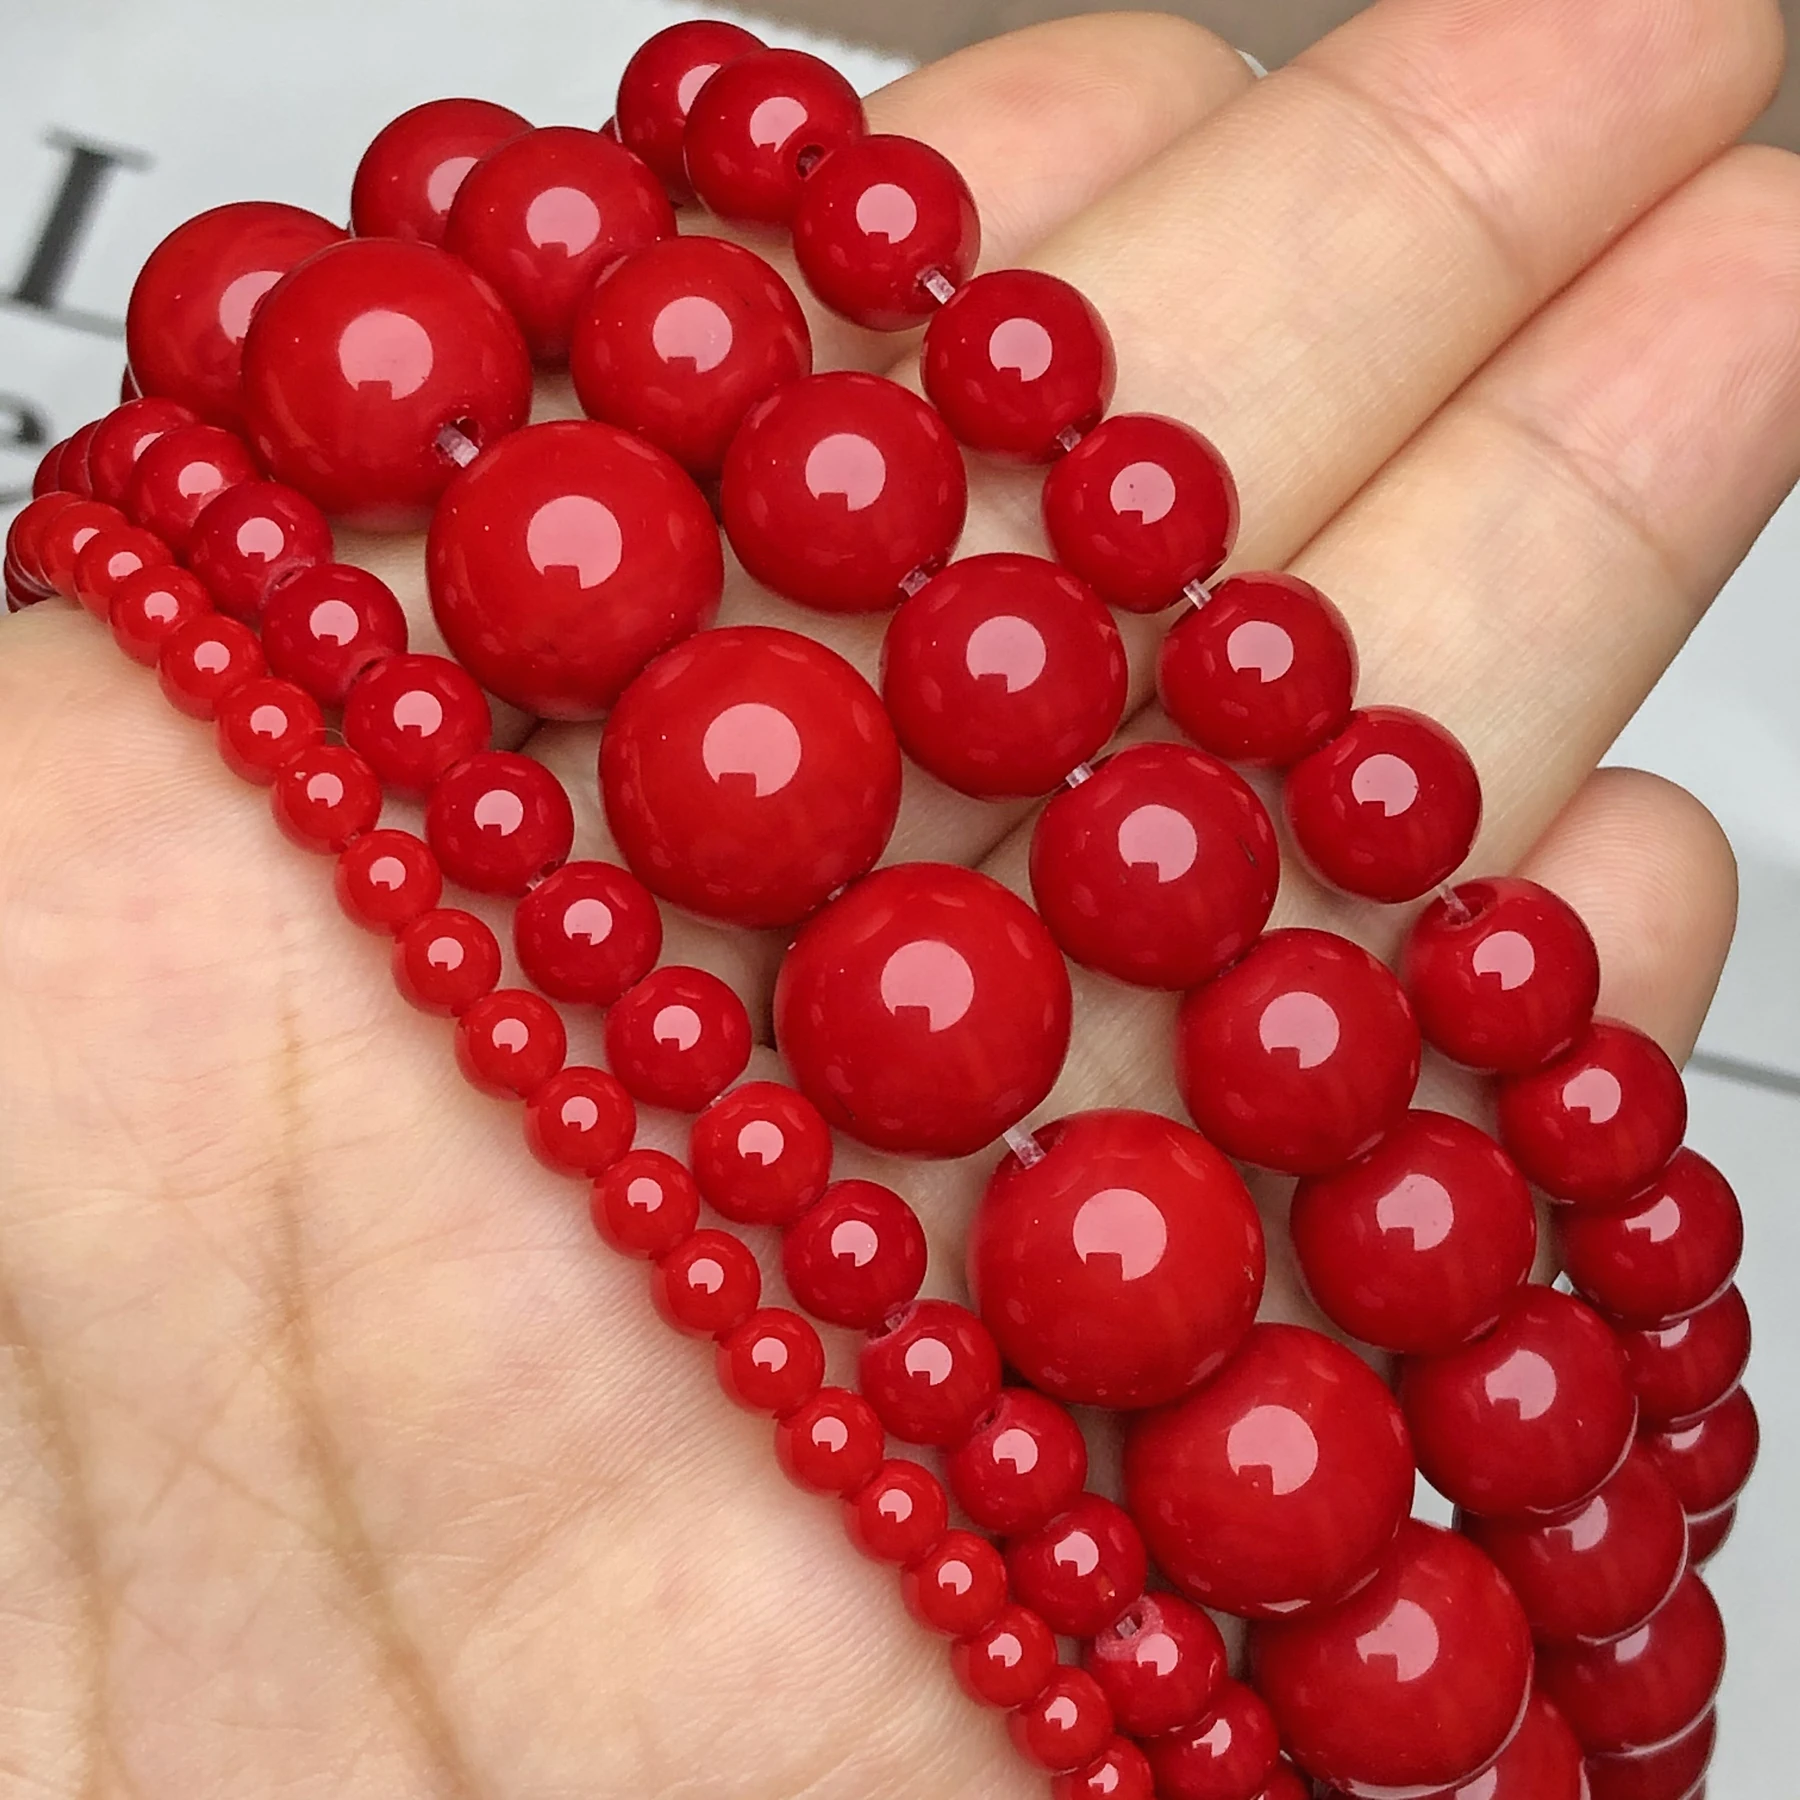 Red Coral Jades Beads Natural Round Loose Stone Beads For Jewelry Making DIY Earrings Bracelets Accessories 15'' 4/6/8/10/12mm